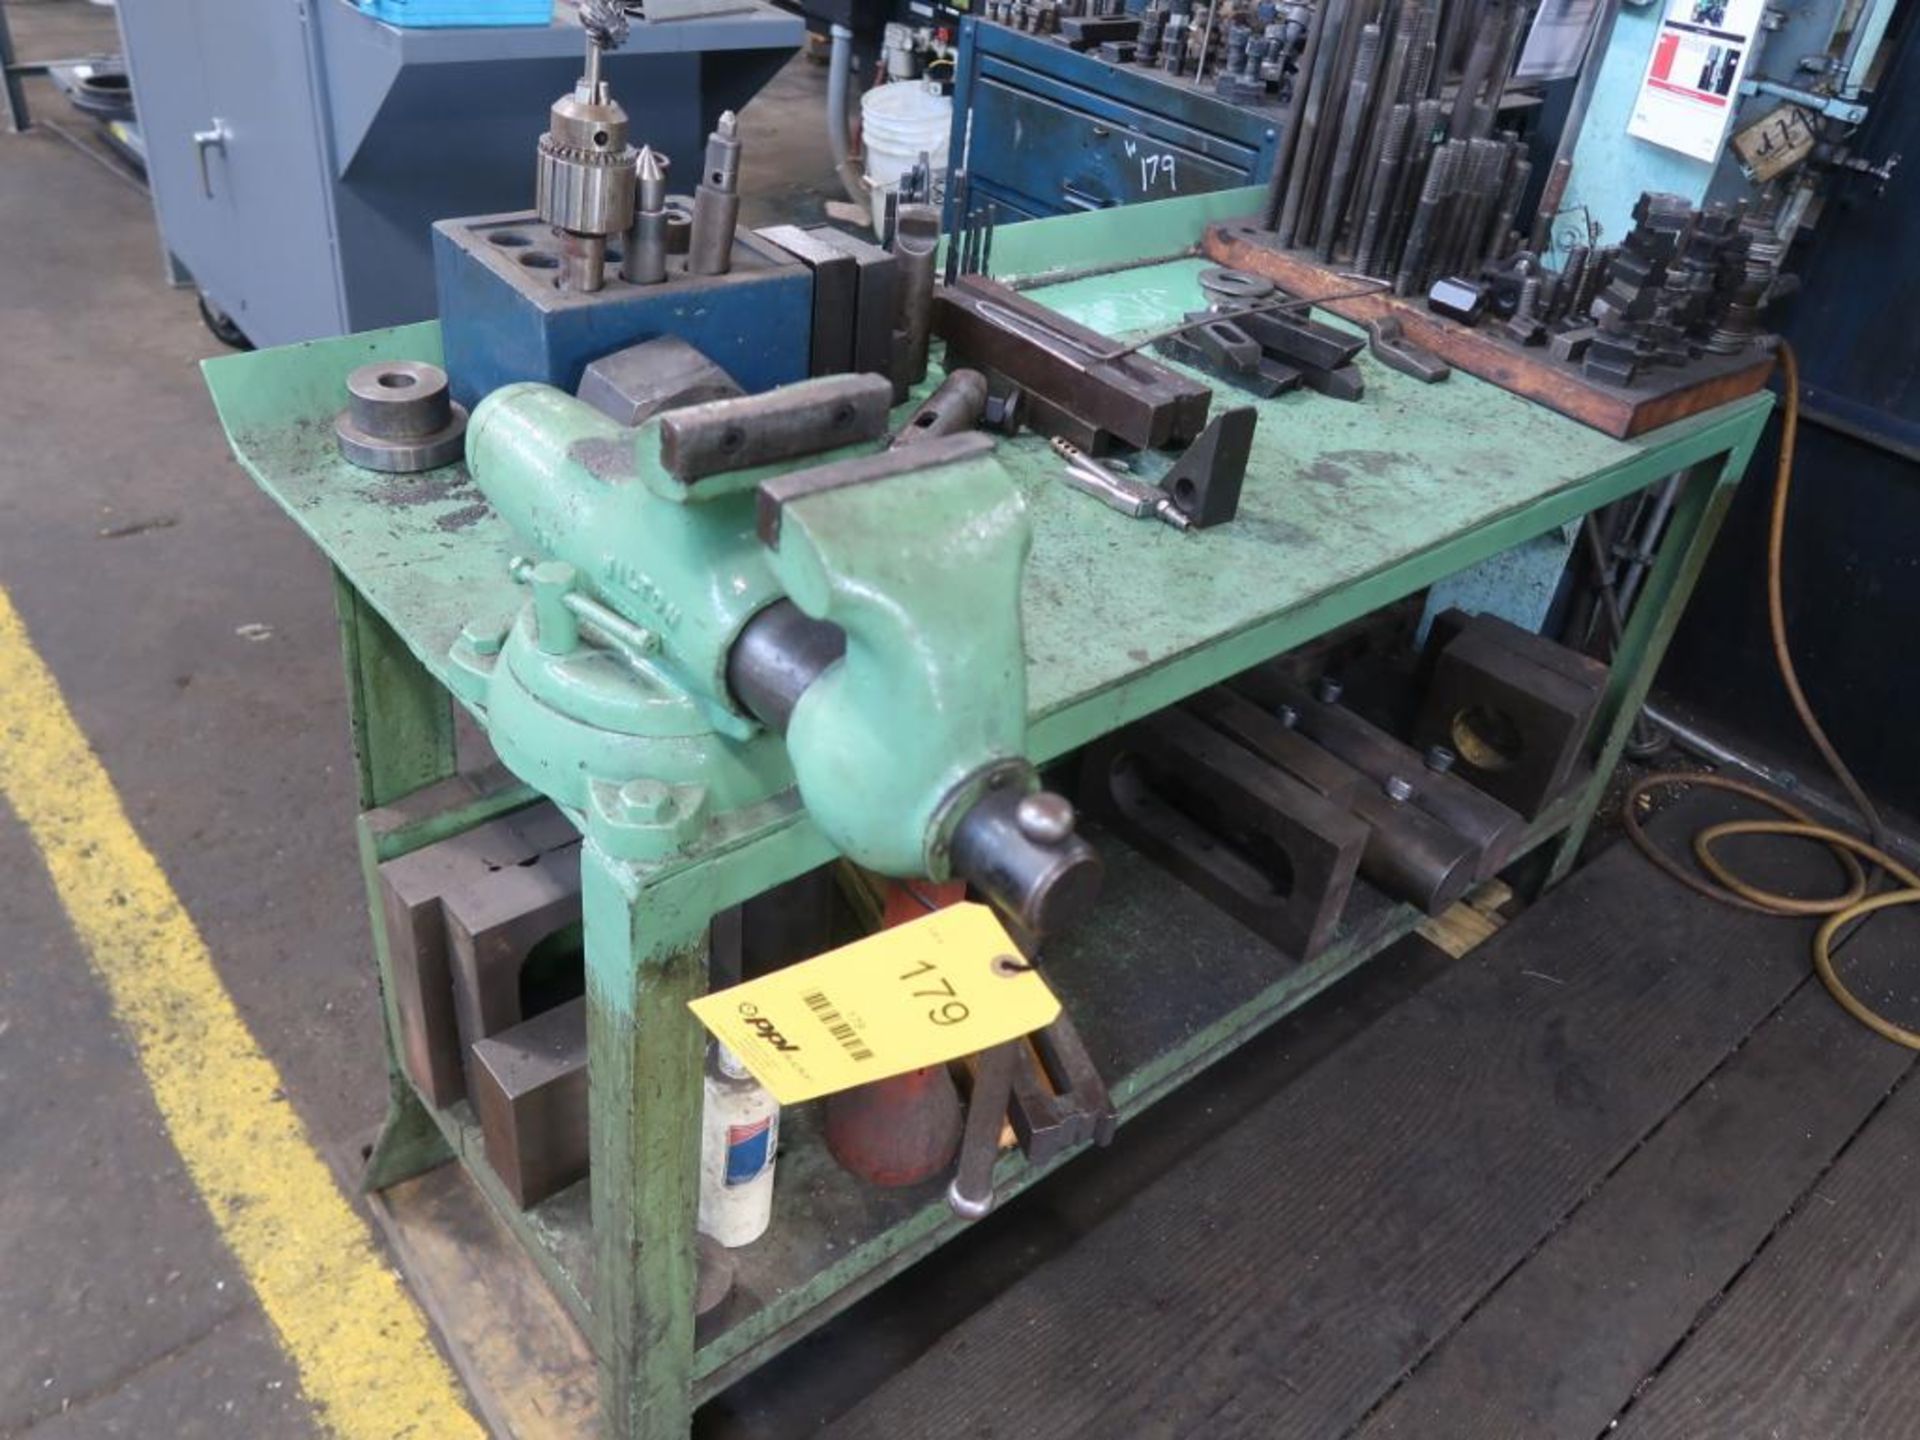 LOT: Wilton 4-1/2 in. Torpedo Vise, Steel Table, Rolling Cabinet with Contents including Hold Downs,